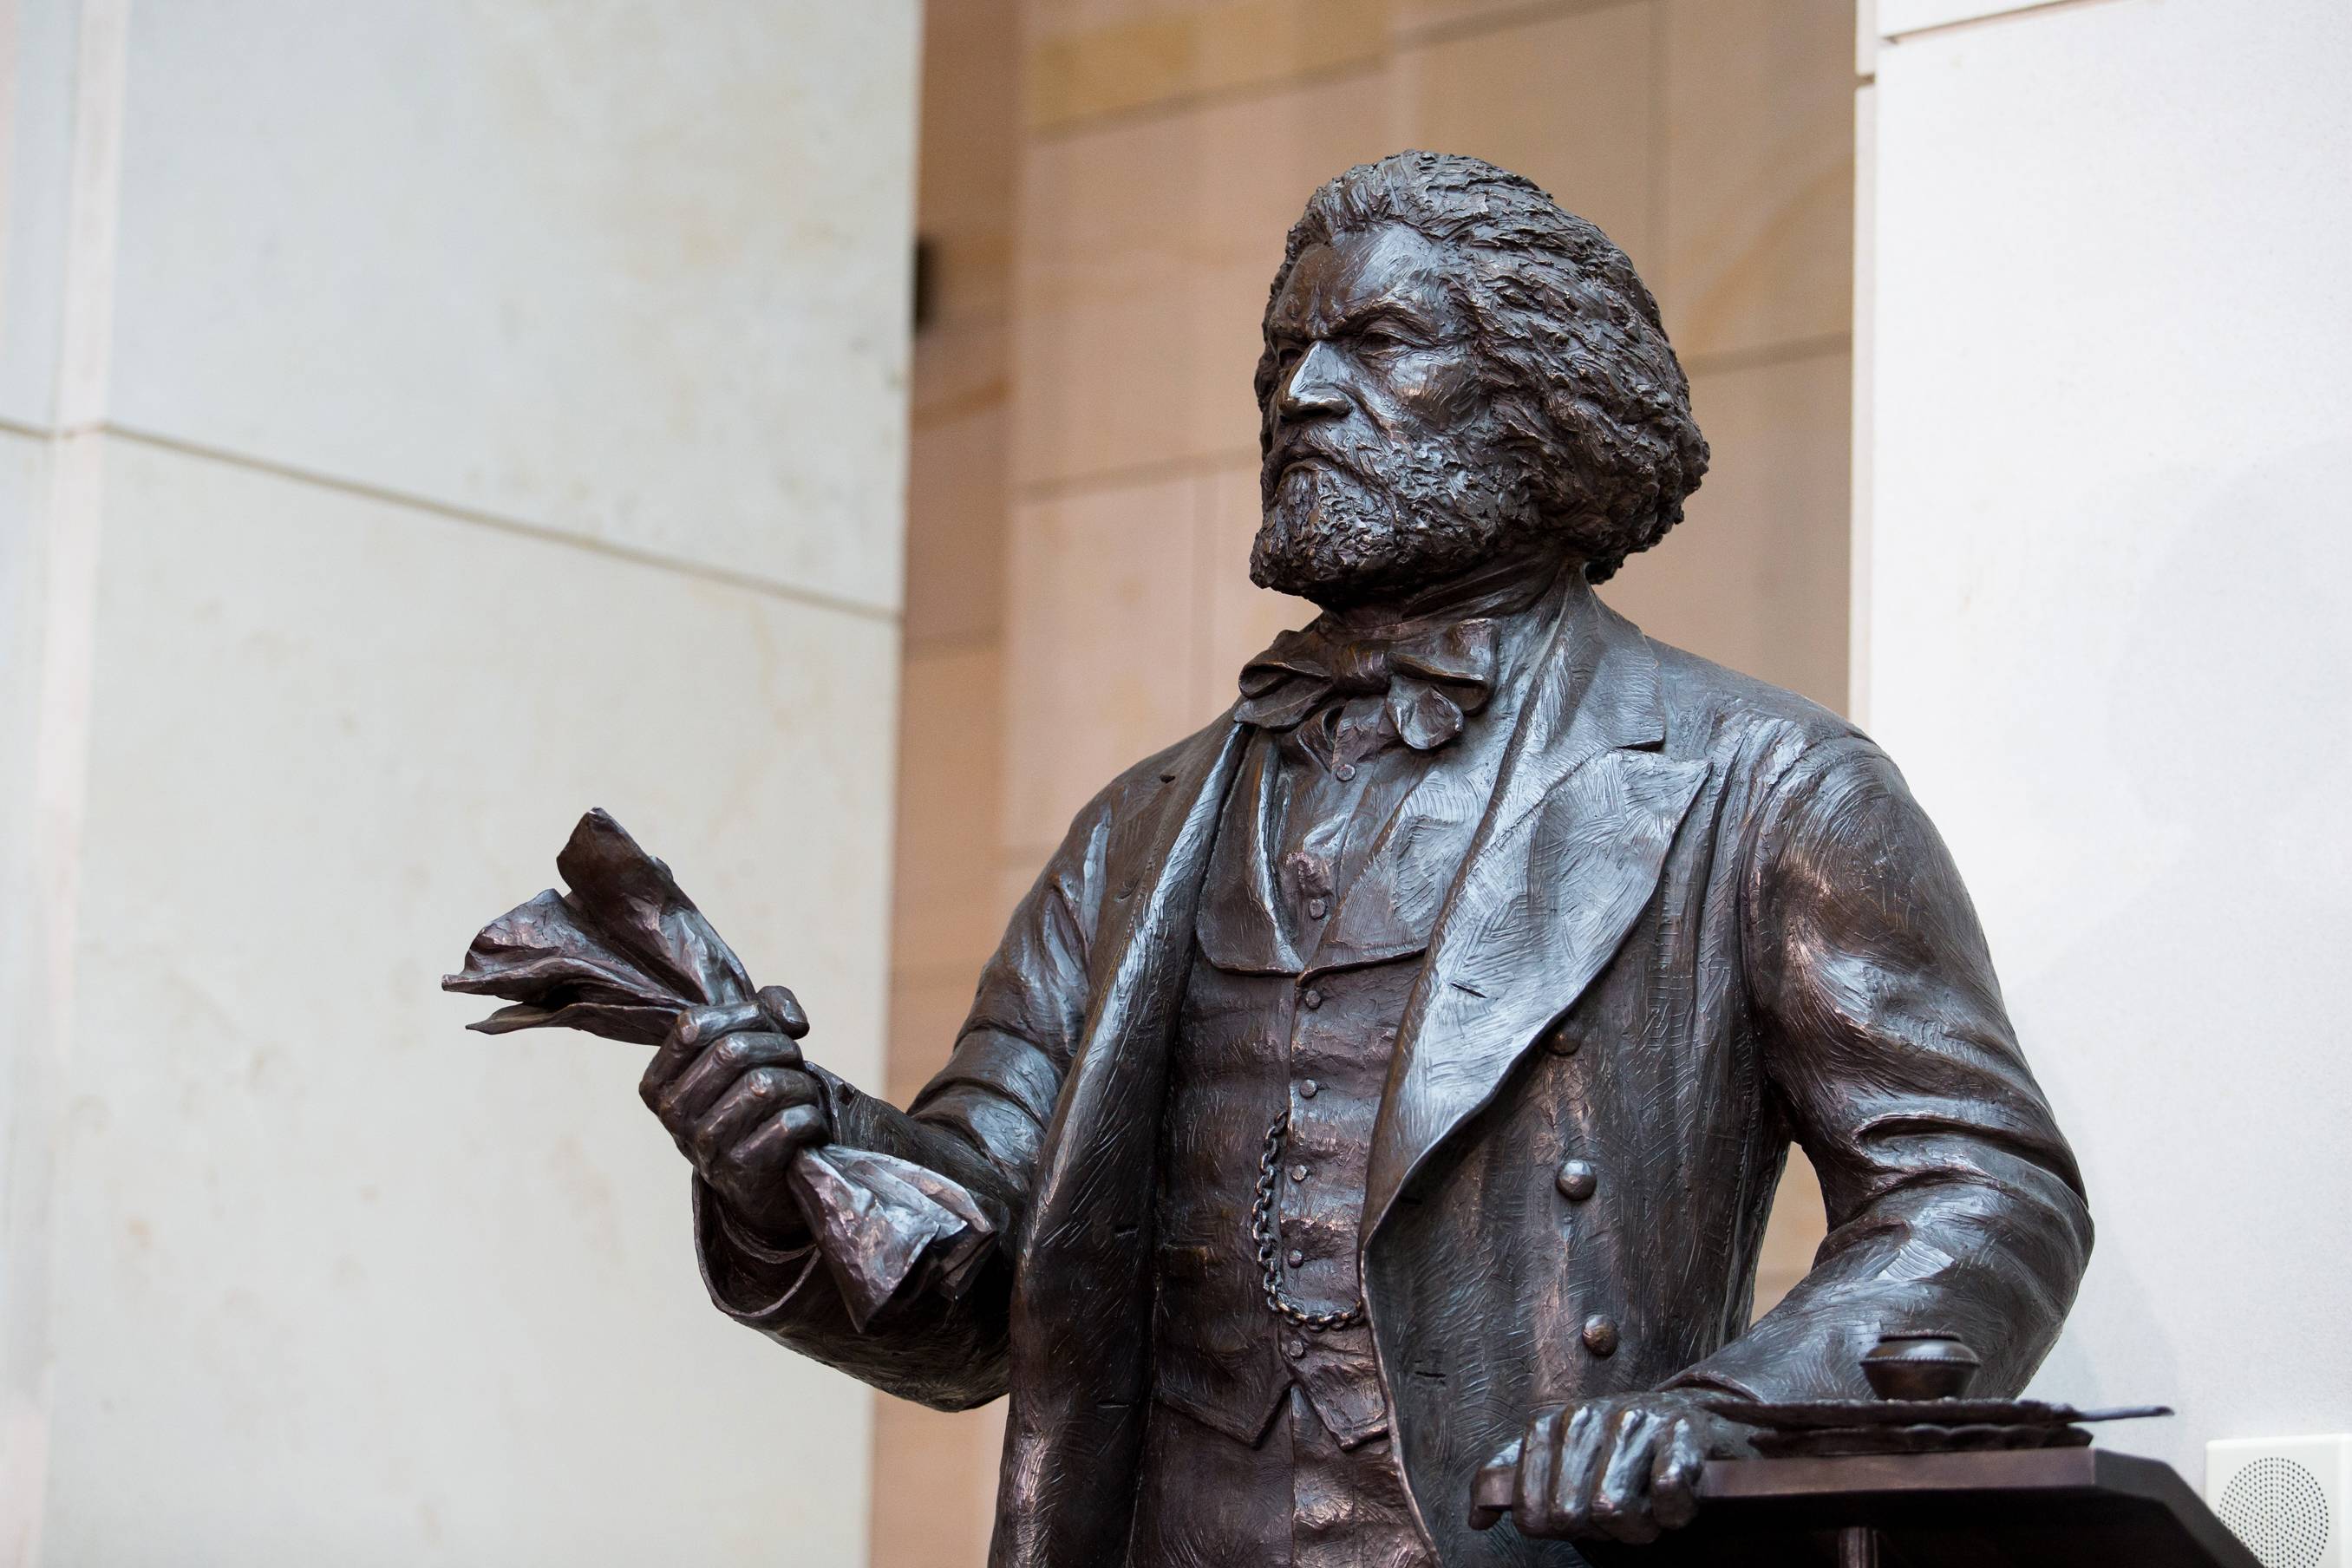 Frederick Douglass Honored With Capitol Statue  - A ceremony was held to unveil a statue honoring abolitionist Frederick Douglass in the Capitol Visitor’s Center Emancipation Hall. After years of delay, the over seven-feet-tall bronze figure became the first statue to represent the District of Columbia in the Emancipation Hall.&nbsp;(Photo: Drew Angerer/Getty Images)